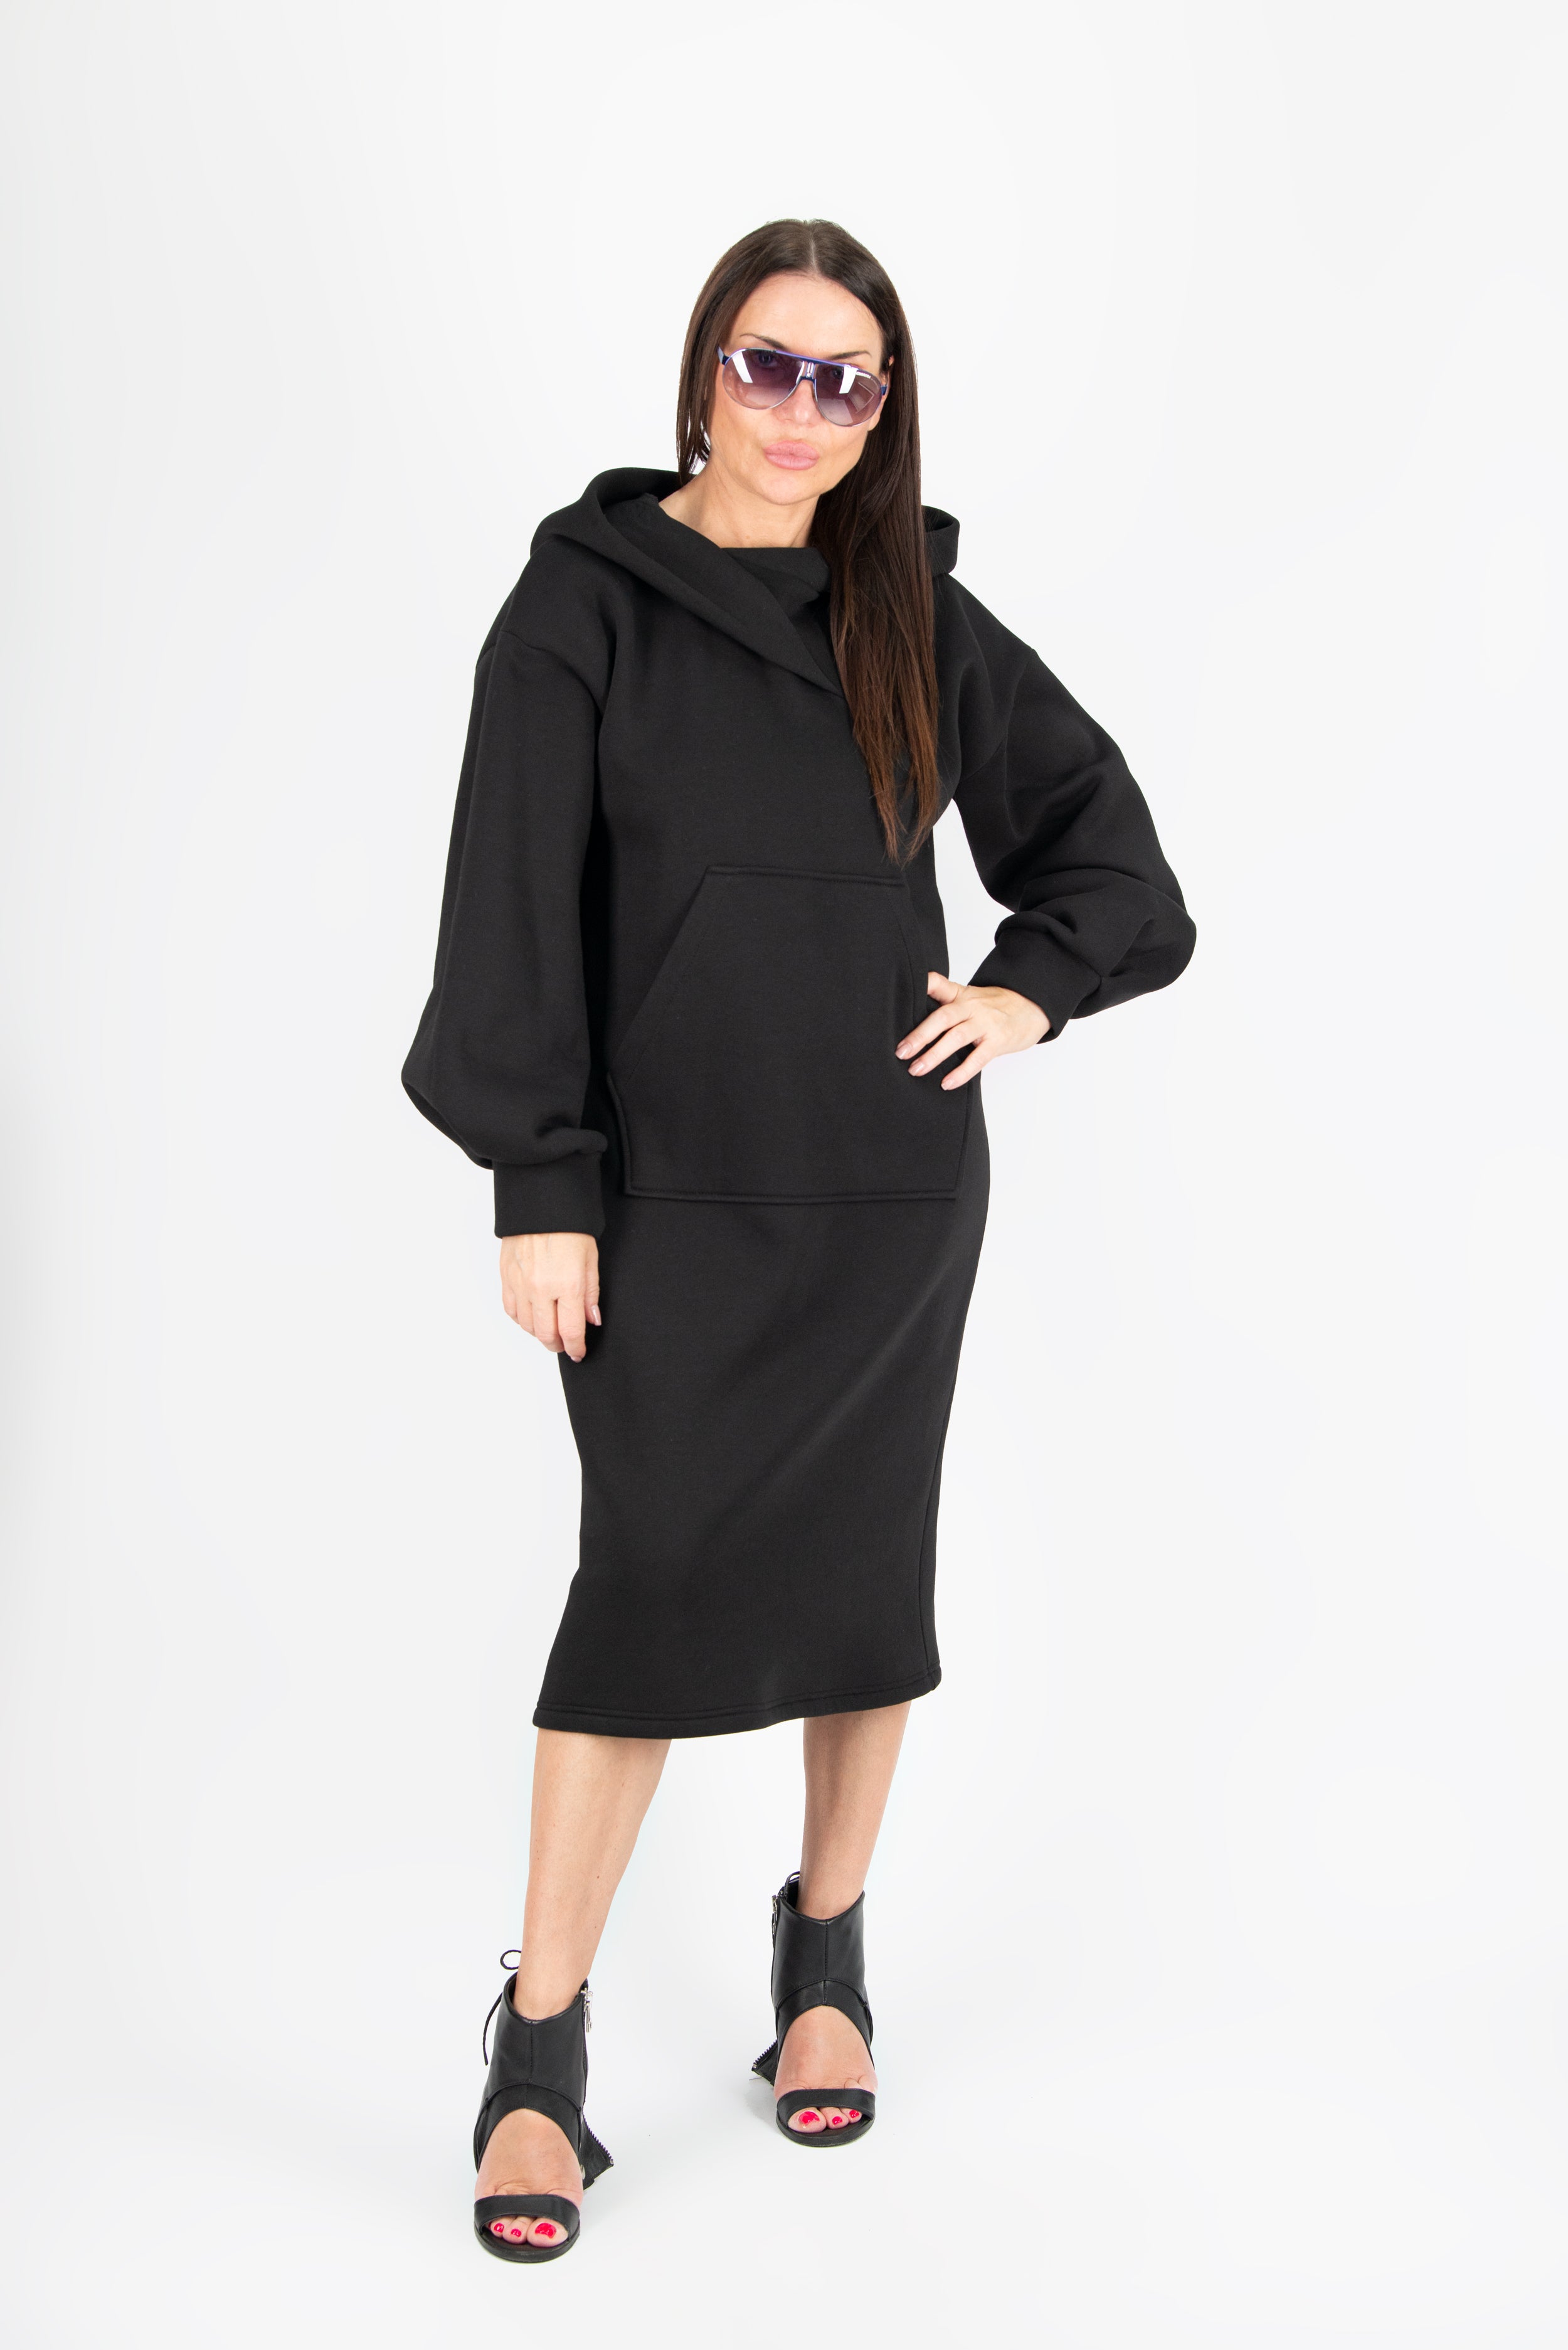 Black Hooded Dress With Wide Long Sleeves by EUG Fashion